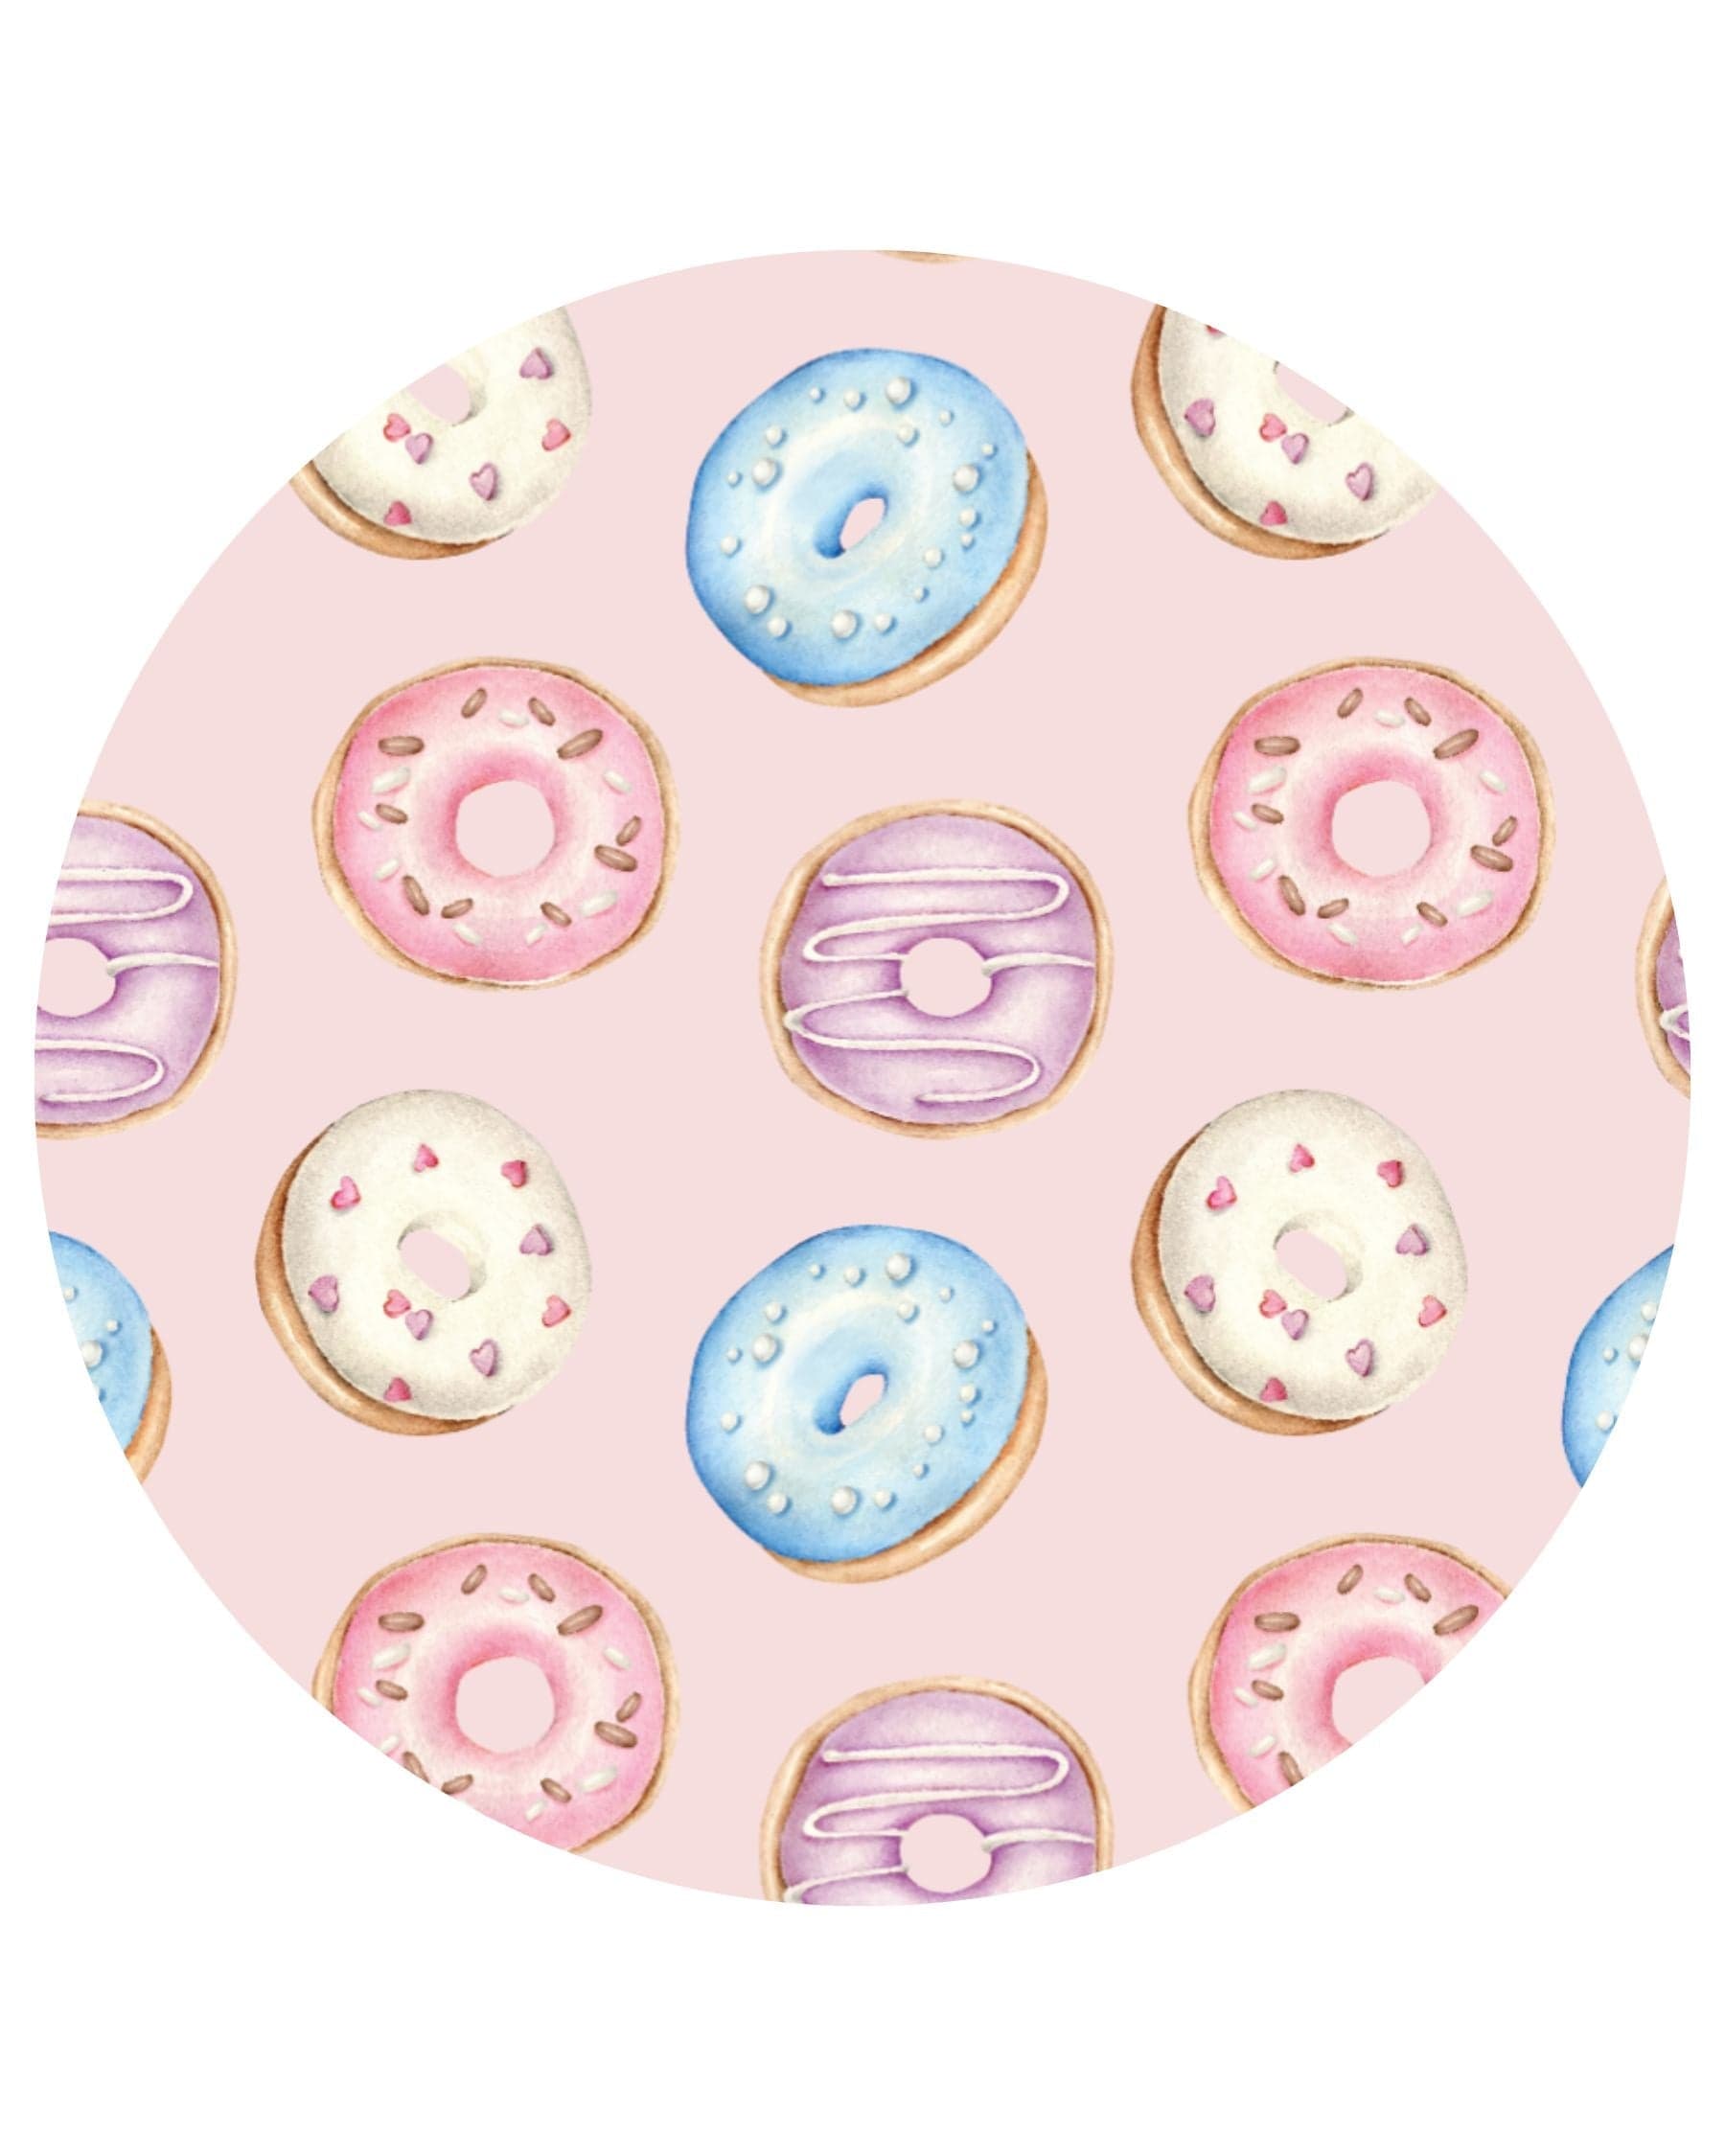 Donuts Pillowcases: Set of 2